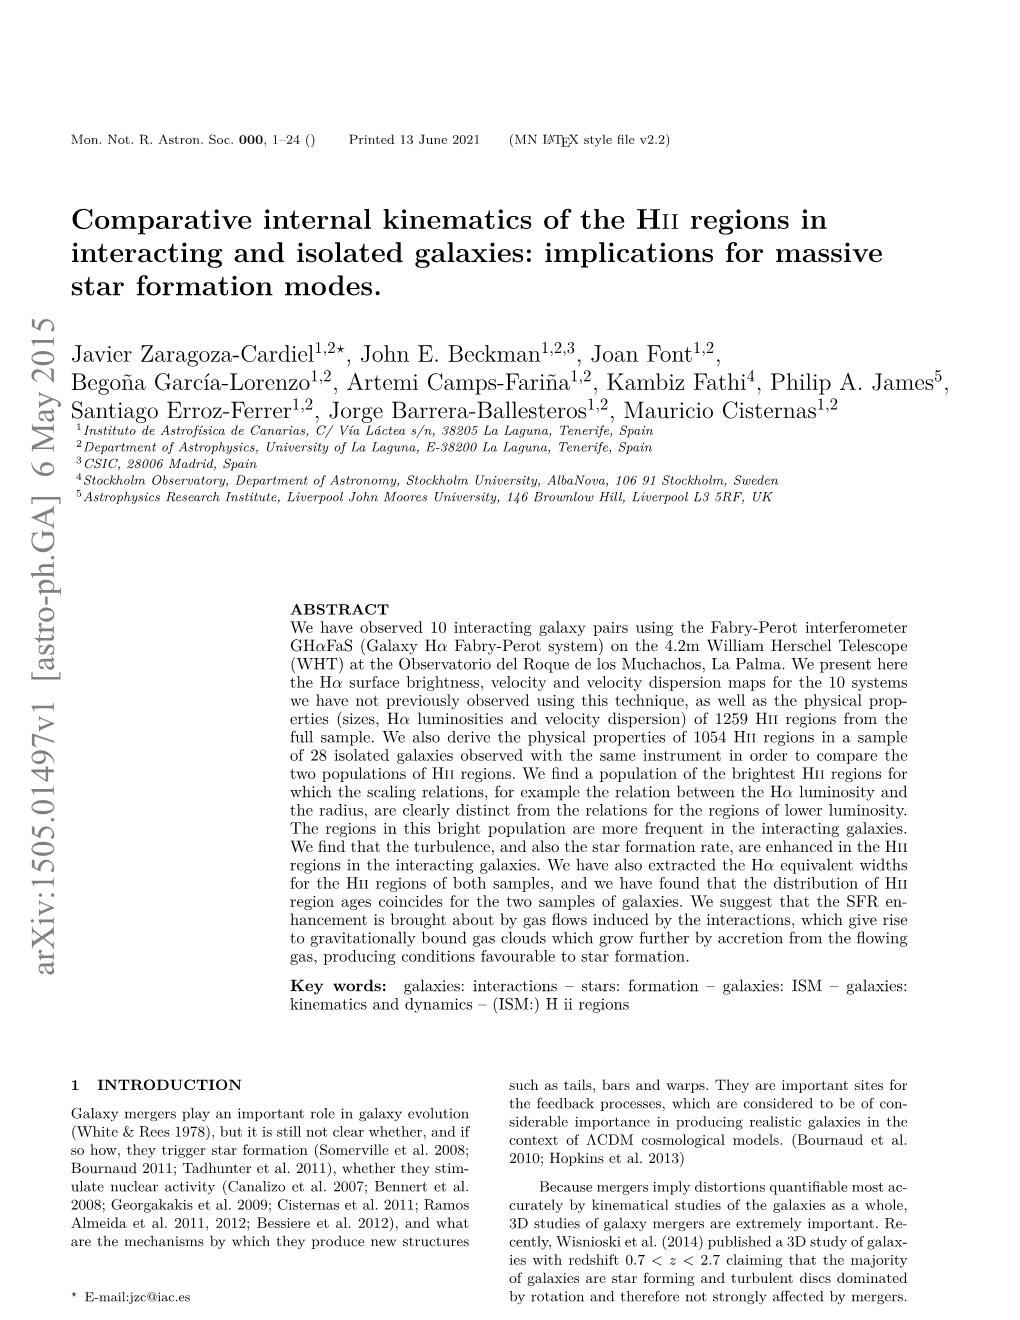 Comparative Internal Kinematics of the Hii Regions in Interacting and Isolated Galaxies: Implications for Massive Star Formation Modes